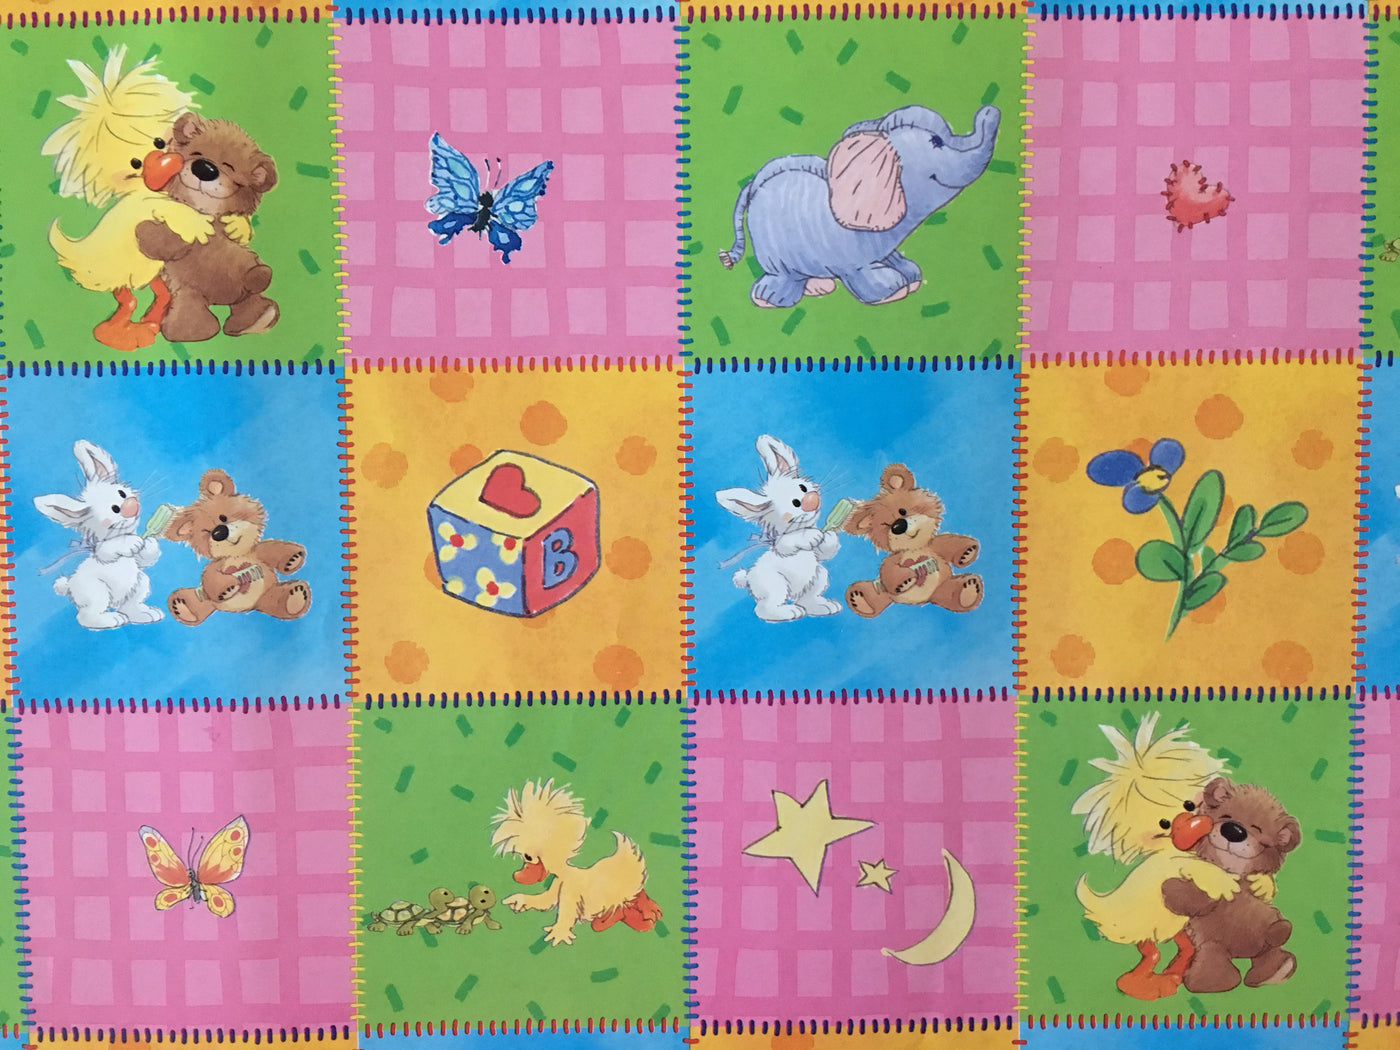 Winnie the Pooh Wrapping Paper for Baby Shower, Blue Winnie the Pooh Gift  Wrap, Cute Winnie the Pooh Baby Shower Wrapping Paper Sheets 